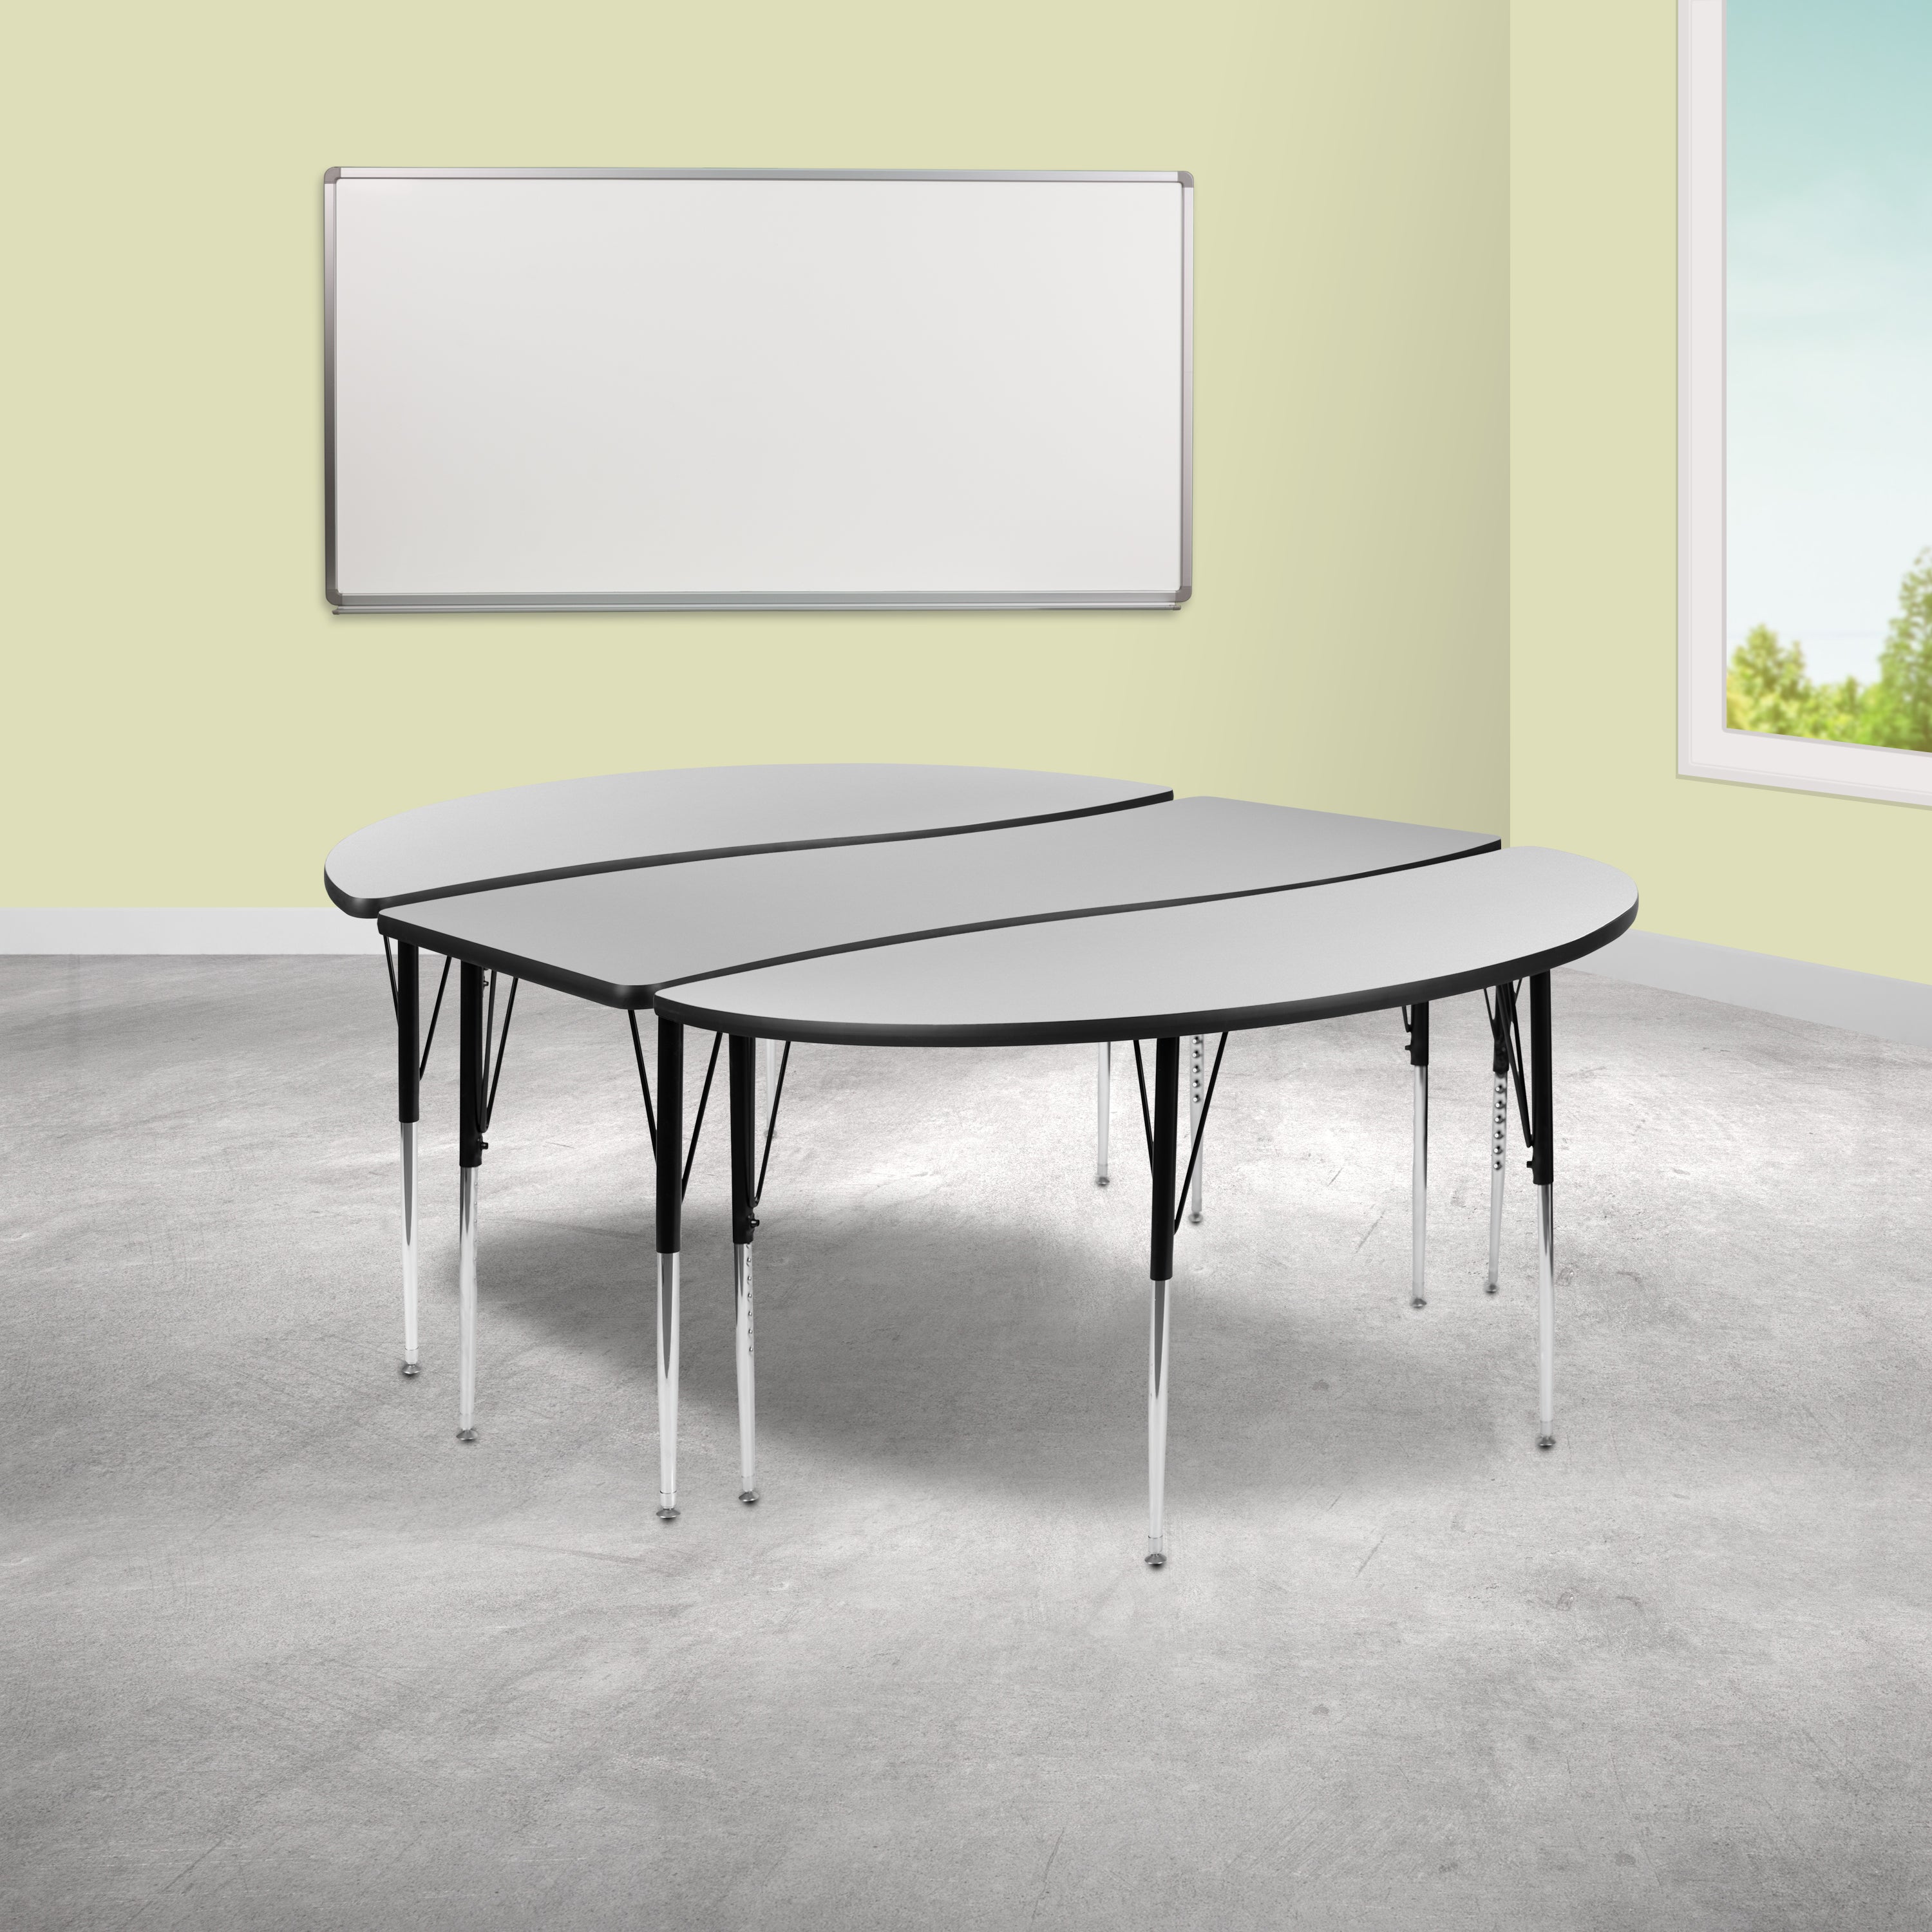 3 Piece 86" Oval Wave Flexible Grey Thermal Laminate Activity Table Set - Standard Height Adjustable Legs-Collaborative Activity Table Set-Flash Furniture-Wall2Wall Furnishings